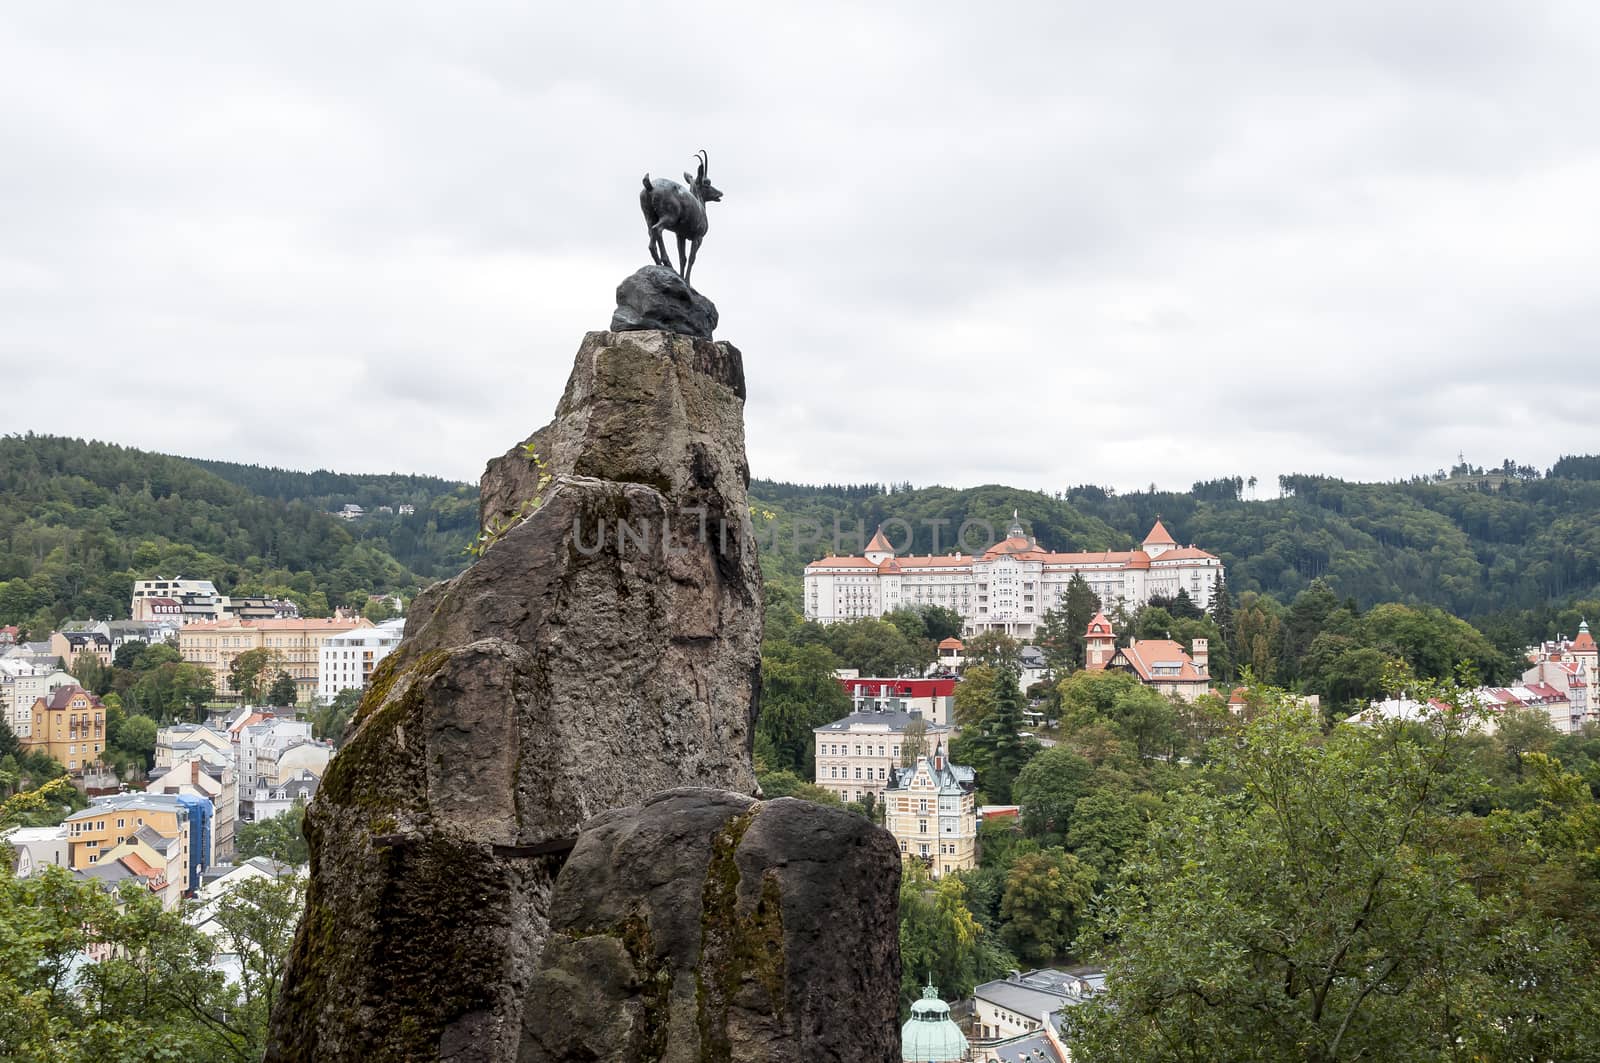 Deer leap lookout: mountain goat standing on a rock, spa town of Karlovy Vary.